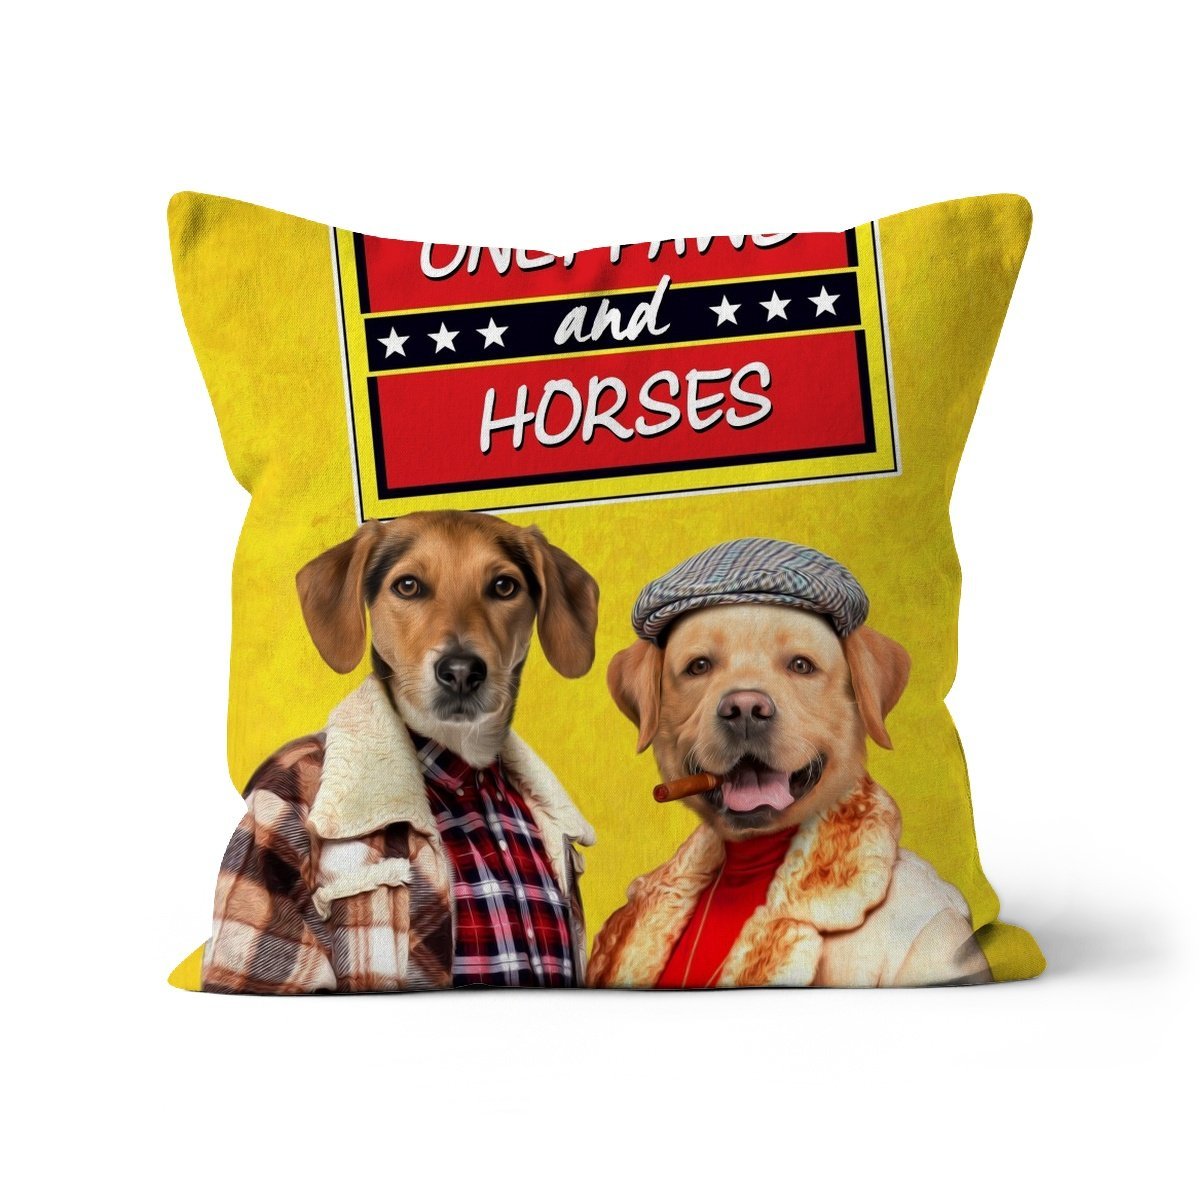 Only Paws & Horses: Custom 2 Pet Throw Pillow - Paw & Glory - #pet portraits# - #dog portraits# - #pet portraits uk#paw & glory, custom pet portrait pillow,dog pillow custom, custom pet pillows, pup pillows, pillow with dogs face, dog pillow cases